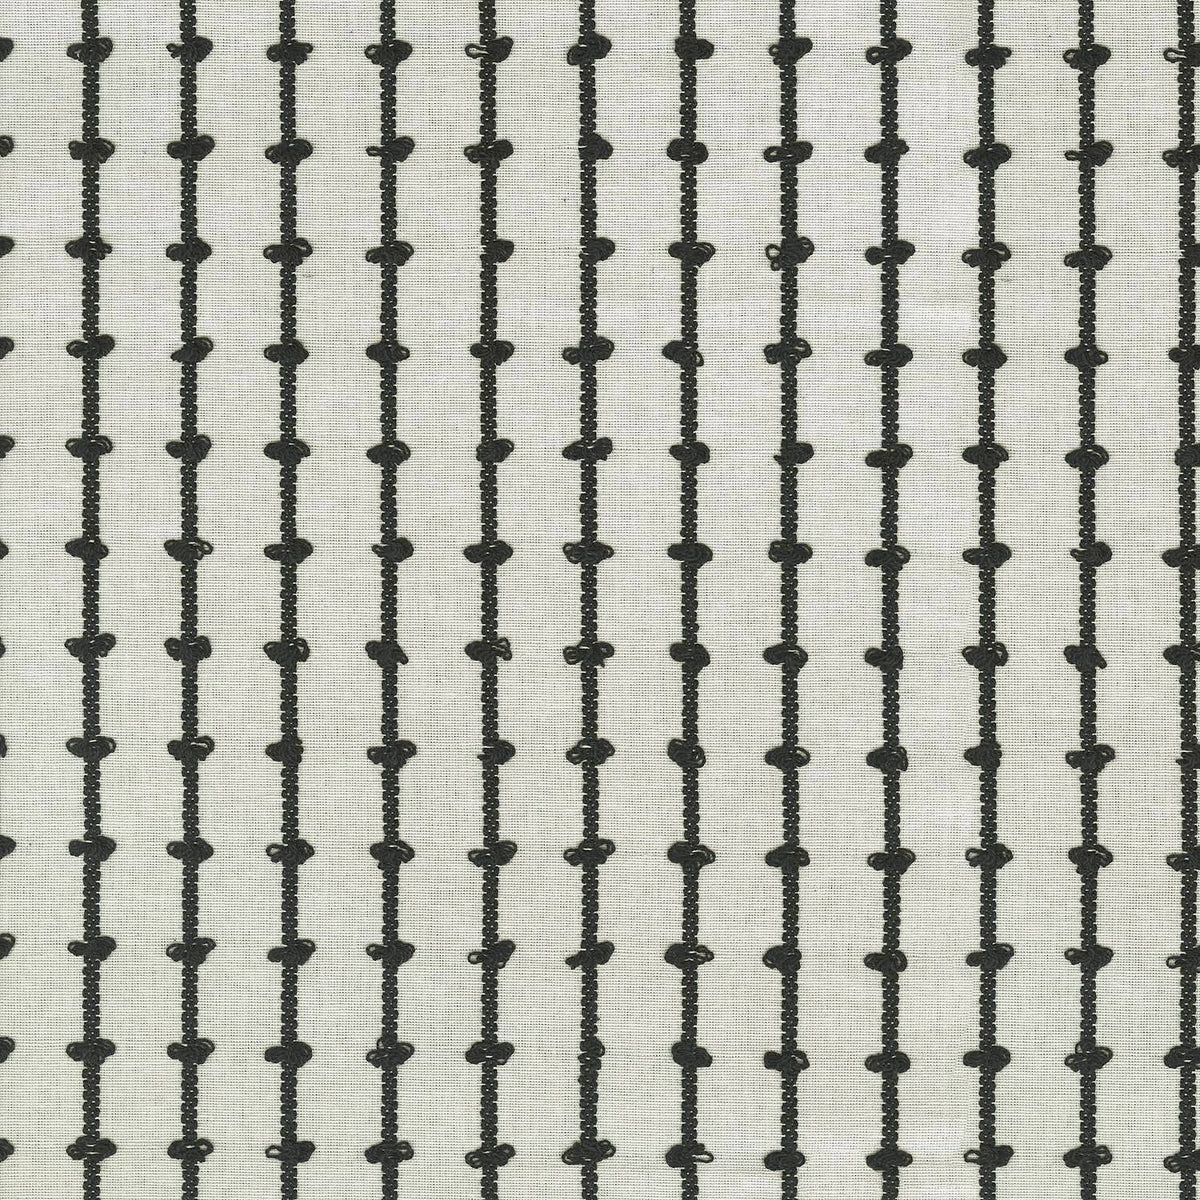 P/K Lifestyles Loops - Domino 410610 Fabric Swatch